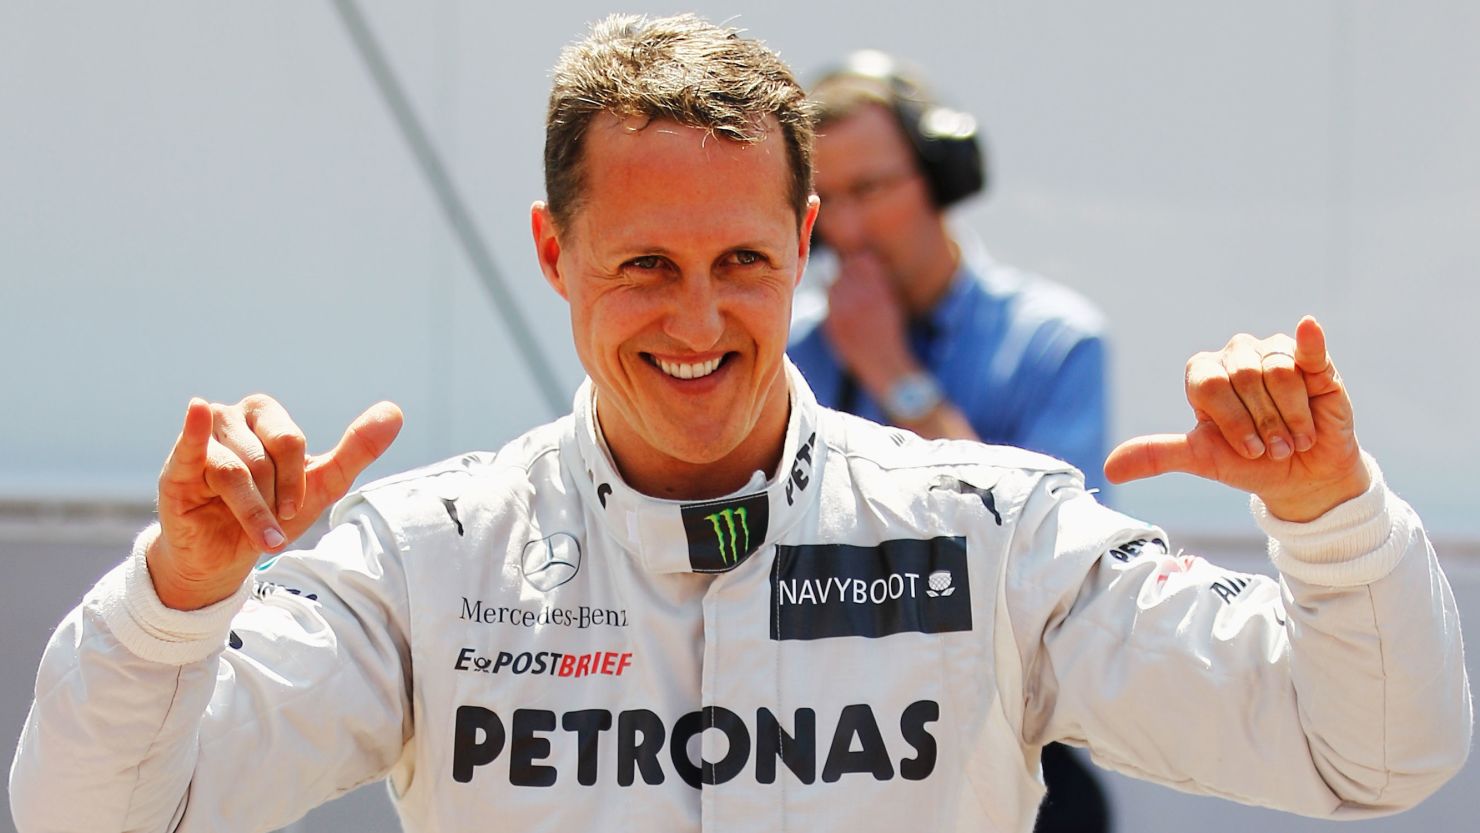 Michael Schumacher is determined to mark his 300th F1 appearance with a good display.